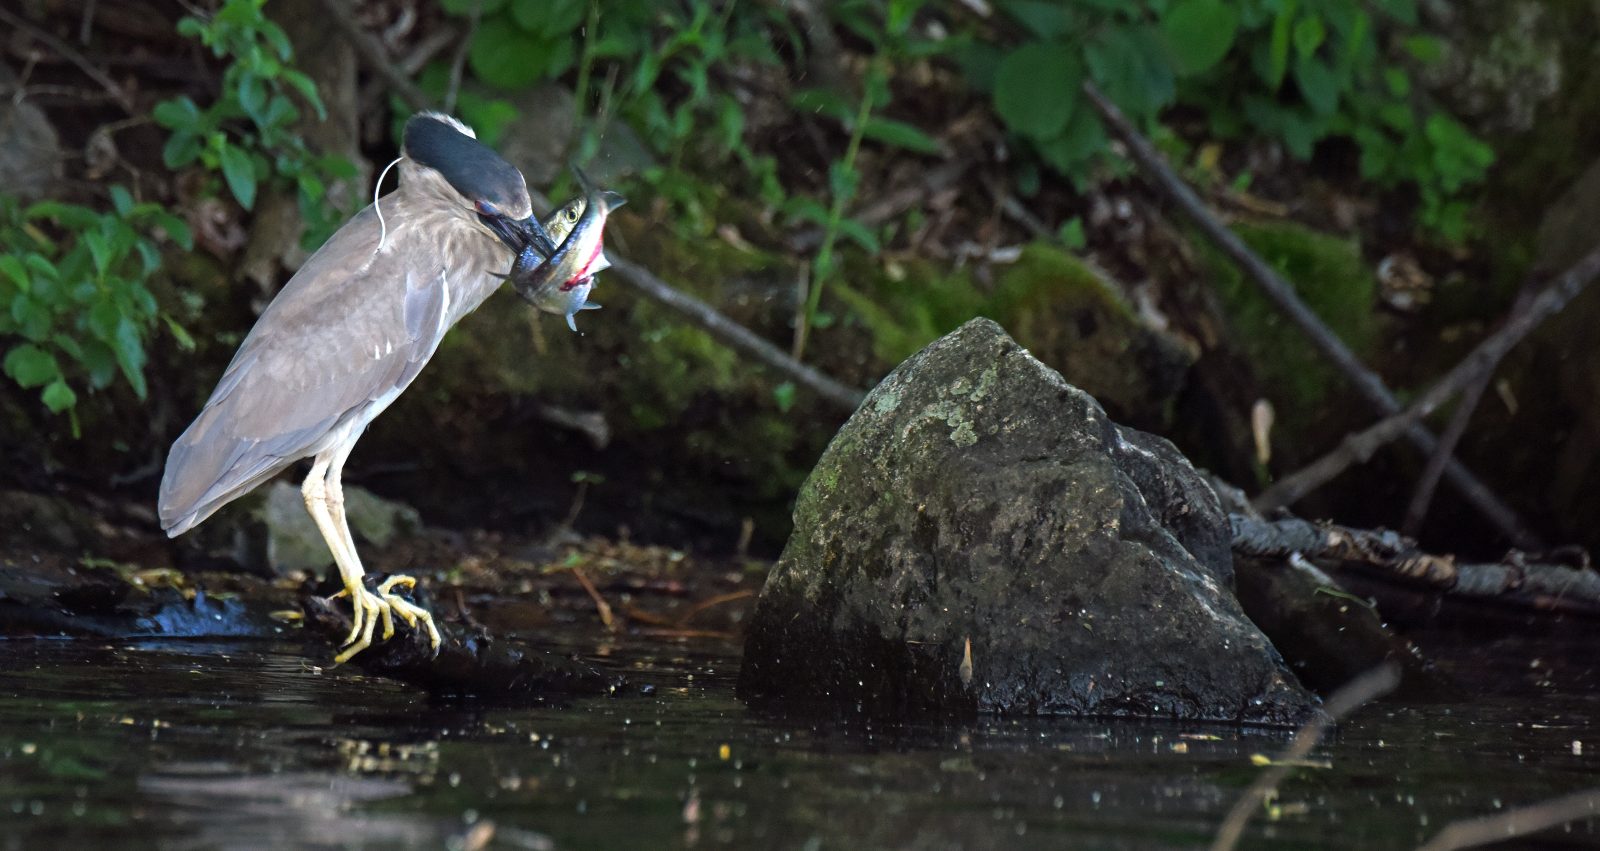 Black-crowned heron with a river herring in its mouth